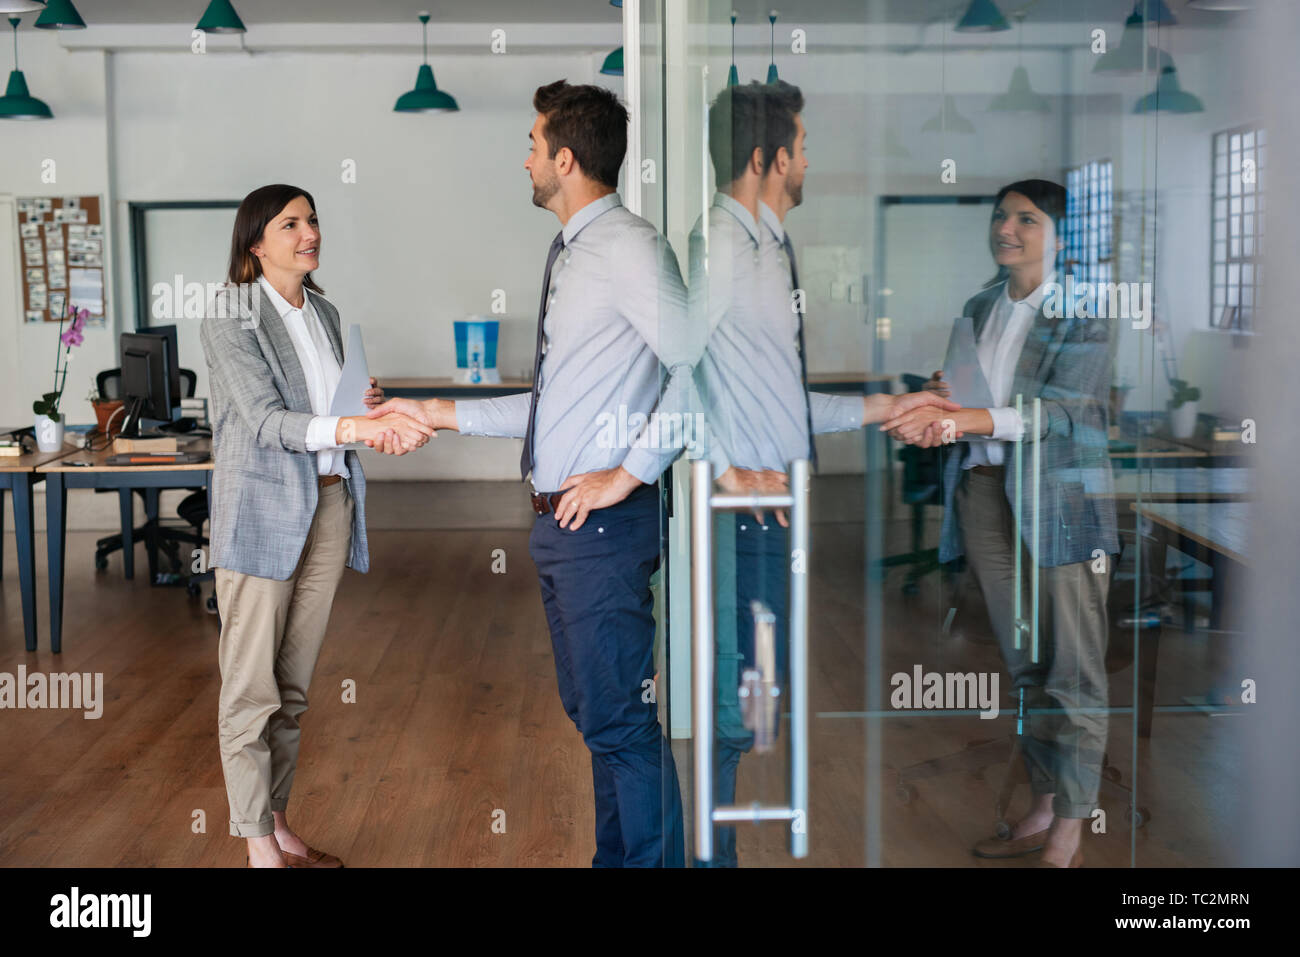 Businessman shaking hands with a new employee in an office Stock Photo